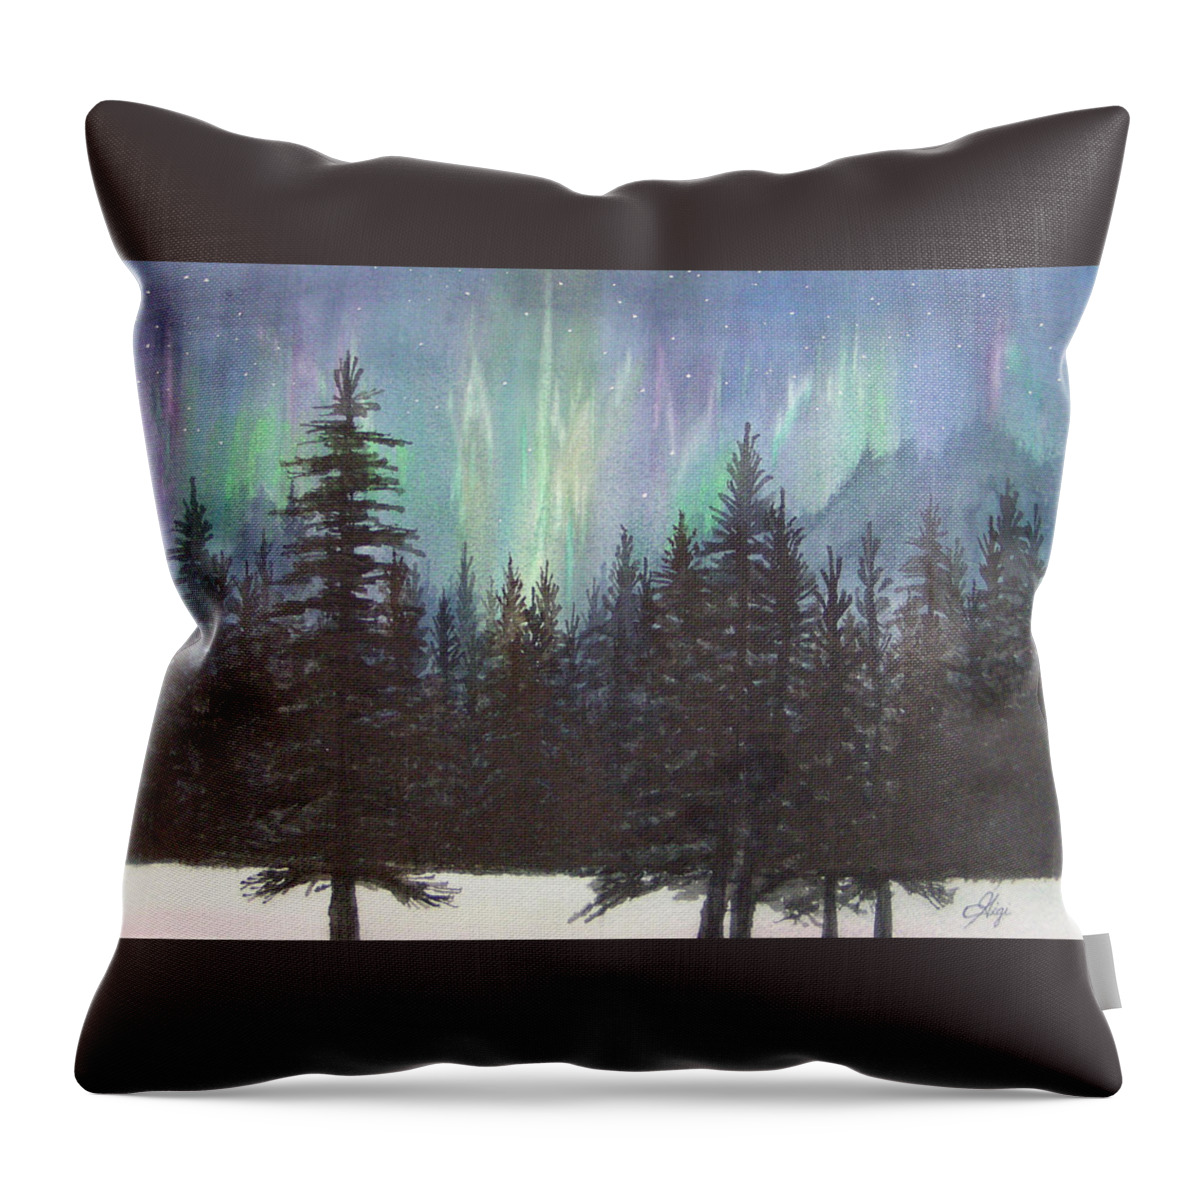 Northern Lights Throw Pillow featuring the painting Starlight Dance by Gigi Dequanne